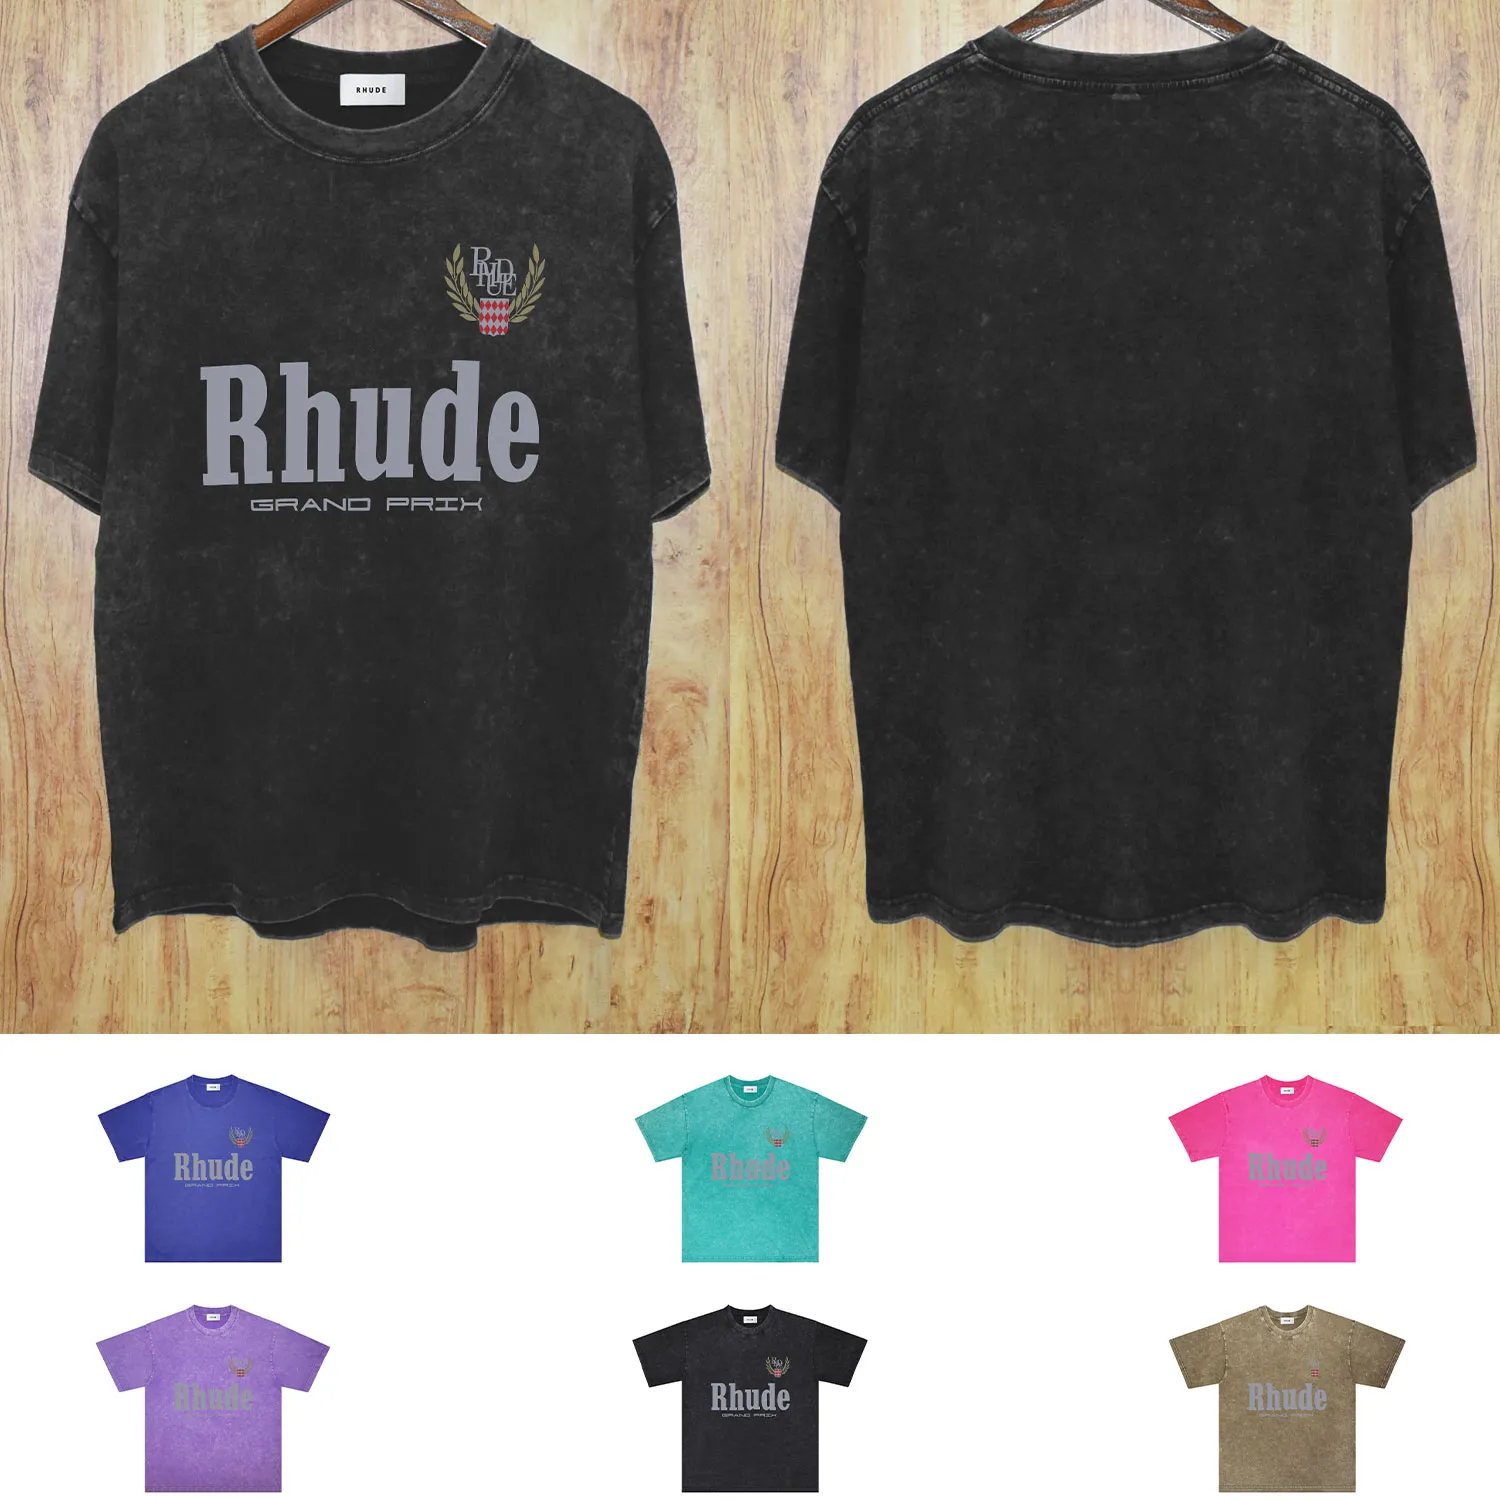 Rhude TShirts Designer T Shirts For Men and Women Trendy Brand Clothes Summer Shorts ZRH009 Vete Letter Wash To Making Old Short Sleeved T-Shirt Size S-XXL